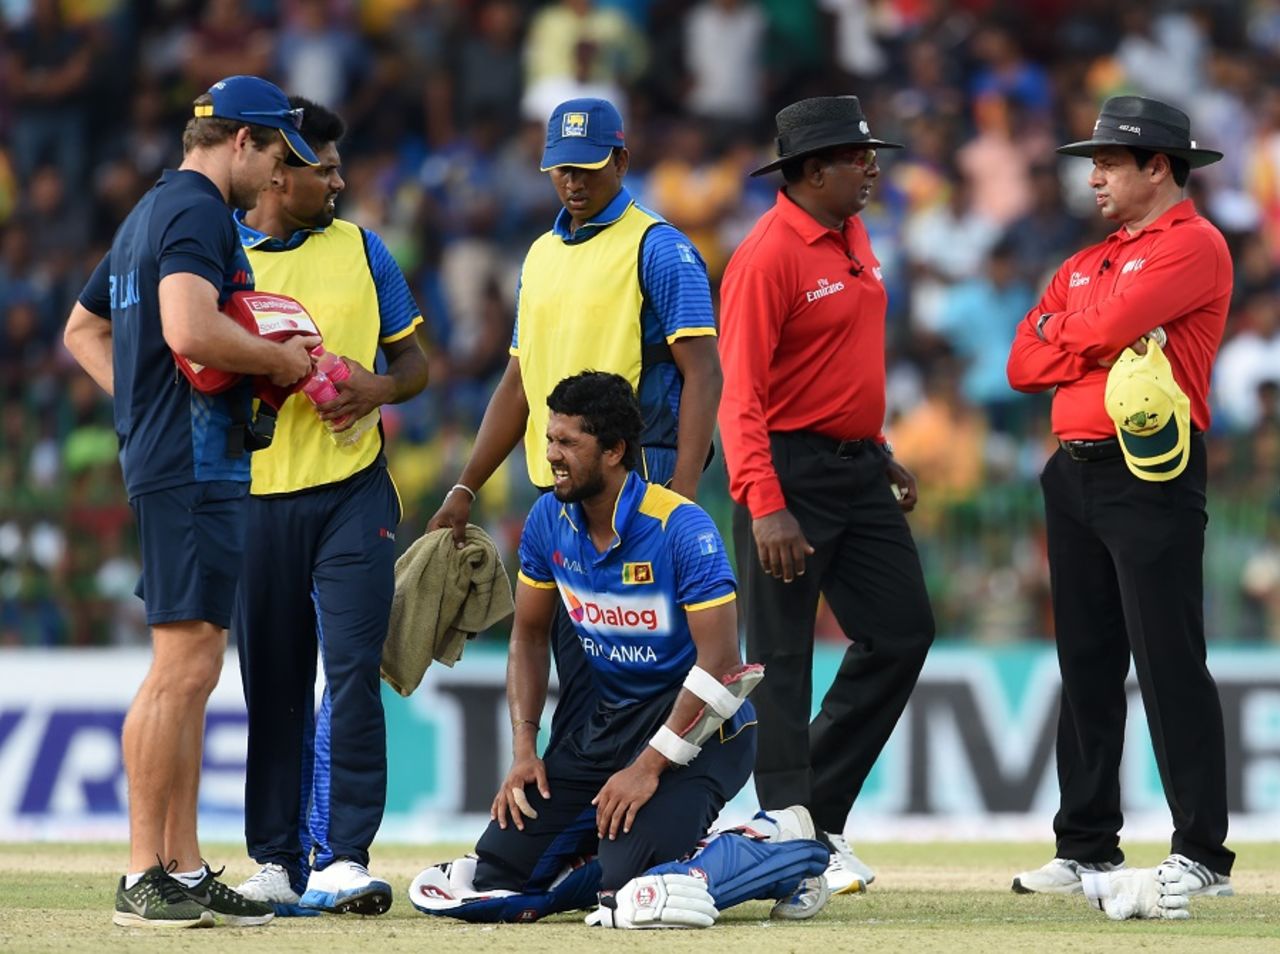 Dinesh Chandimal took a blow to his ribs in the course of his fifty, Sri Lanka v Australia, 1st ODI, R Premadasa Stadium, August 21, 2016